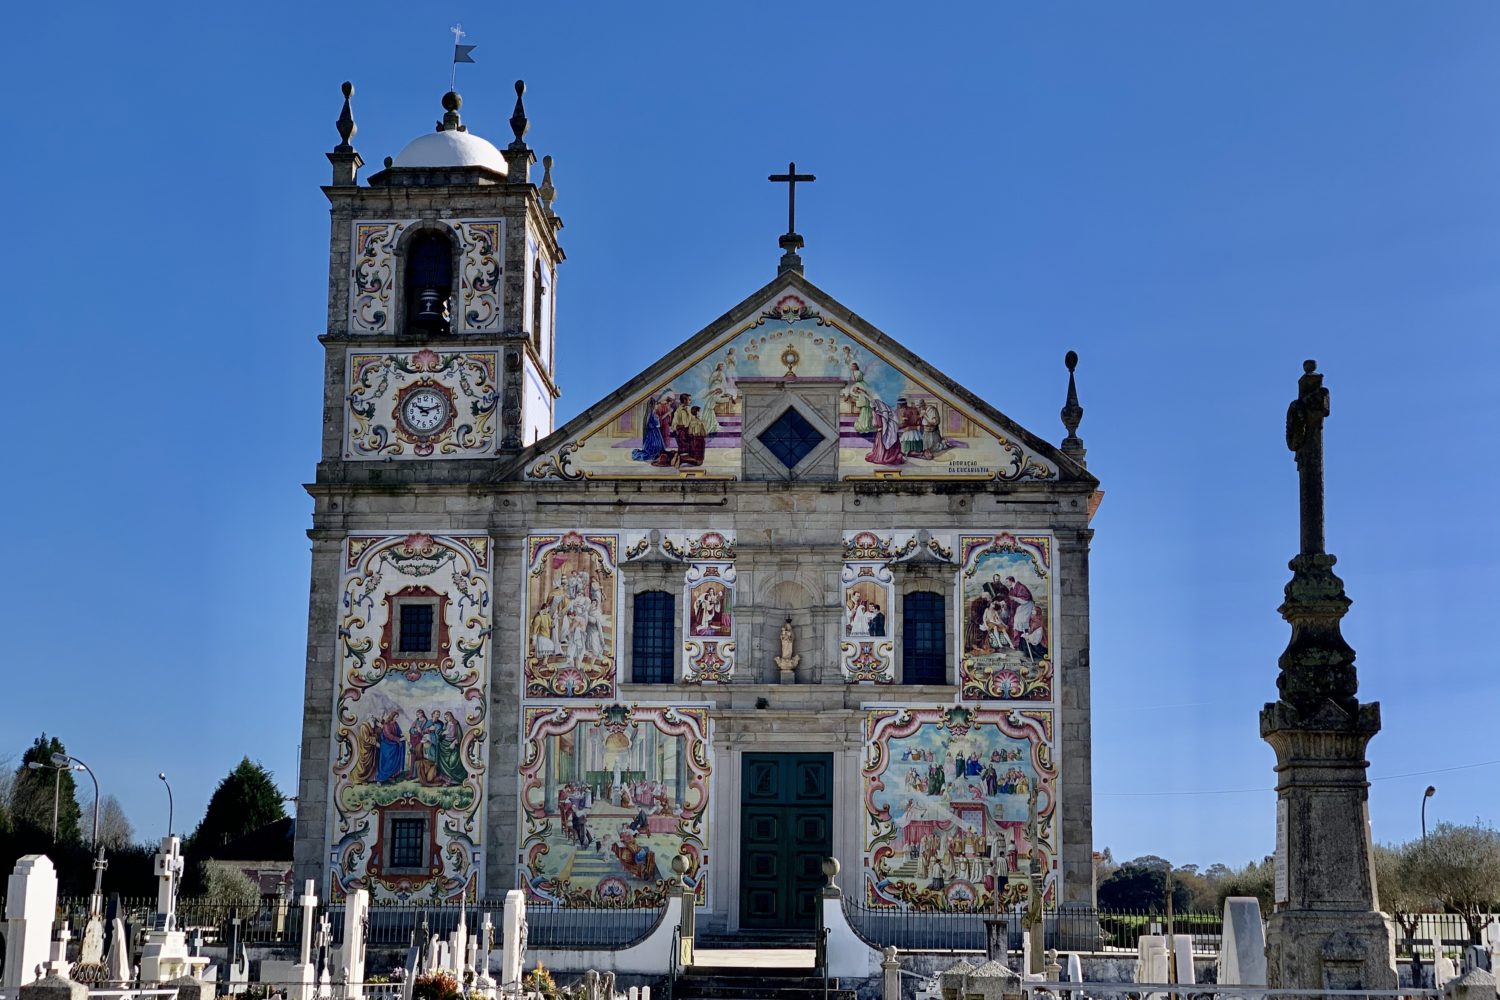 Colorful Portuguese church along the way of your bike tour.